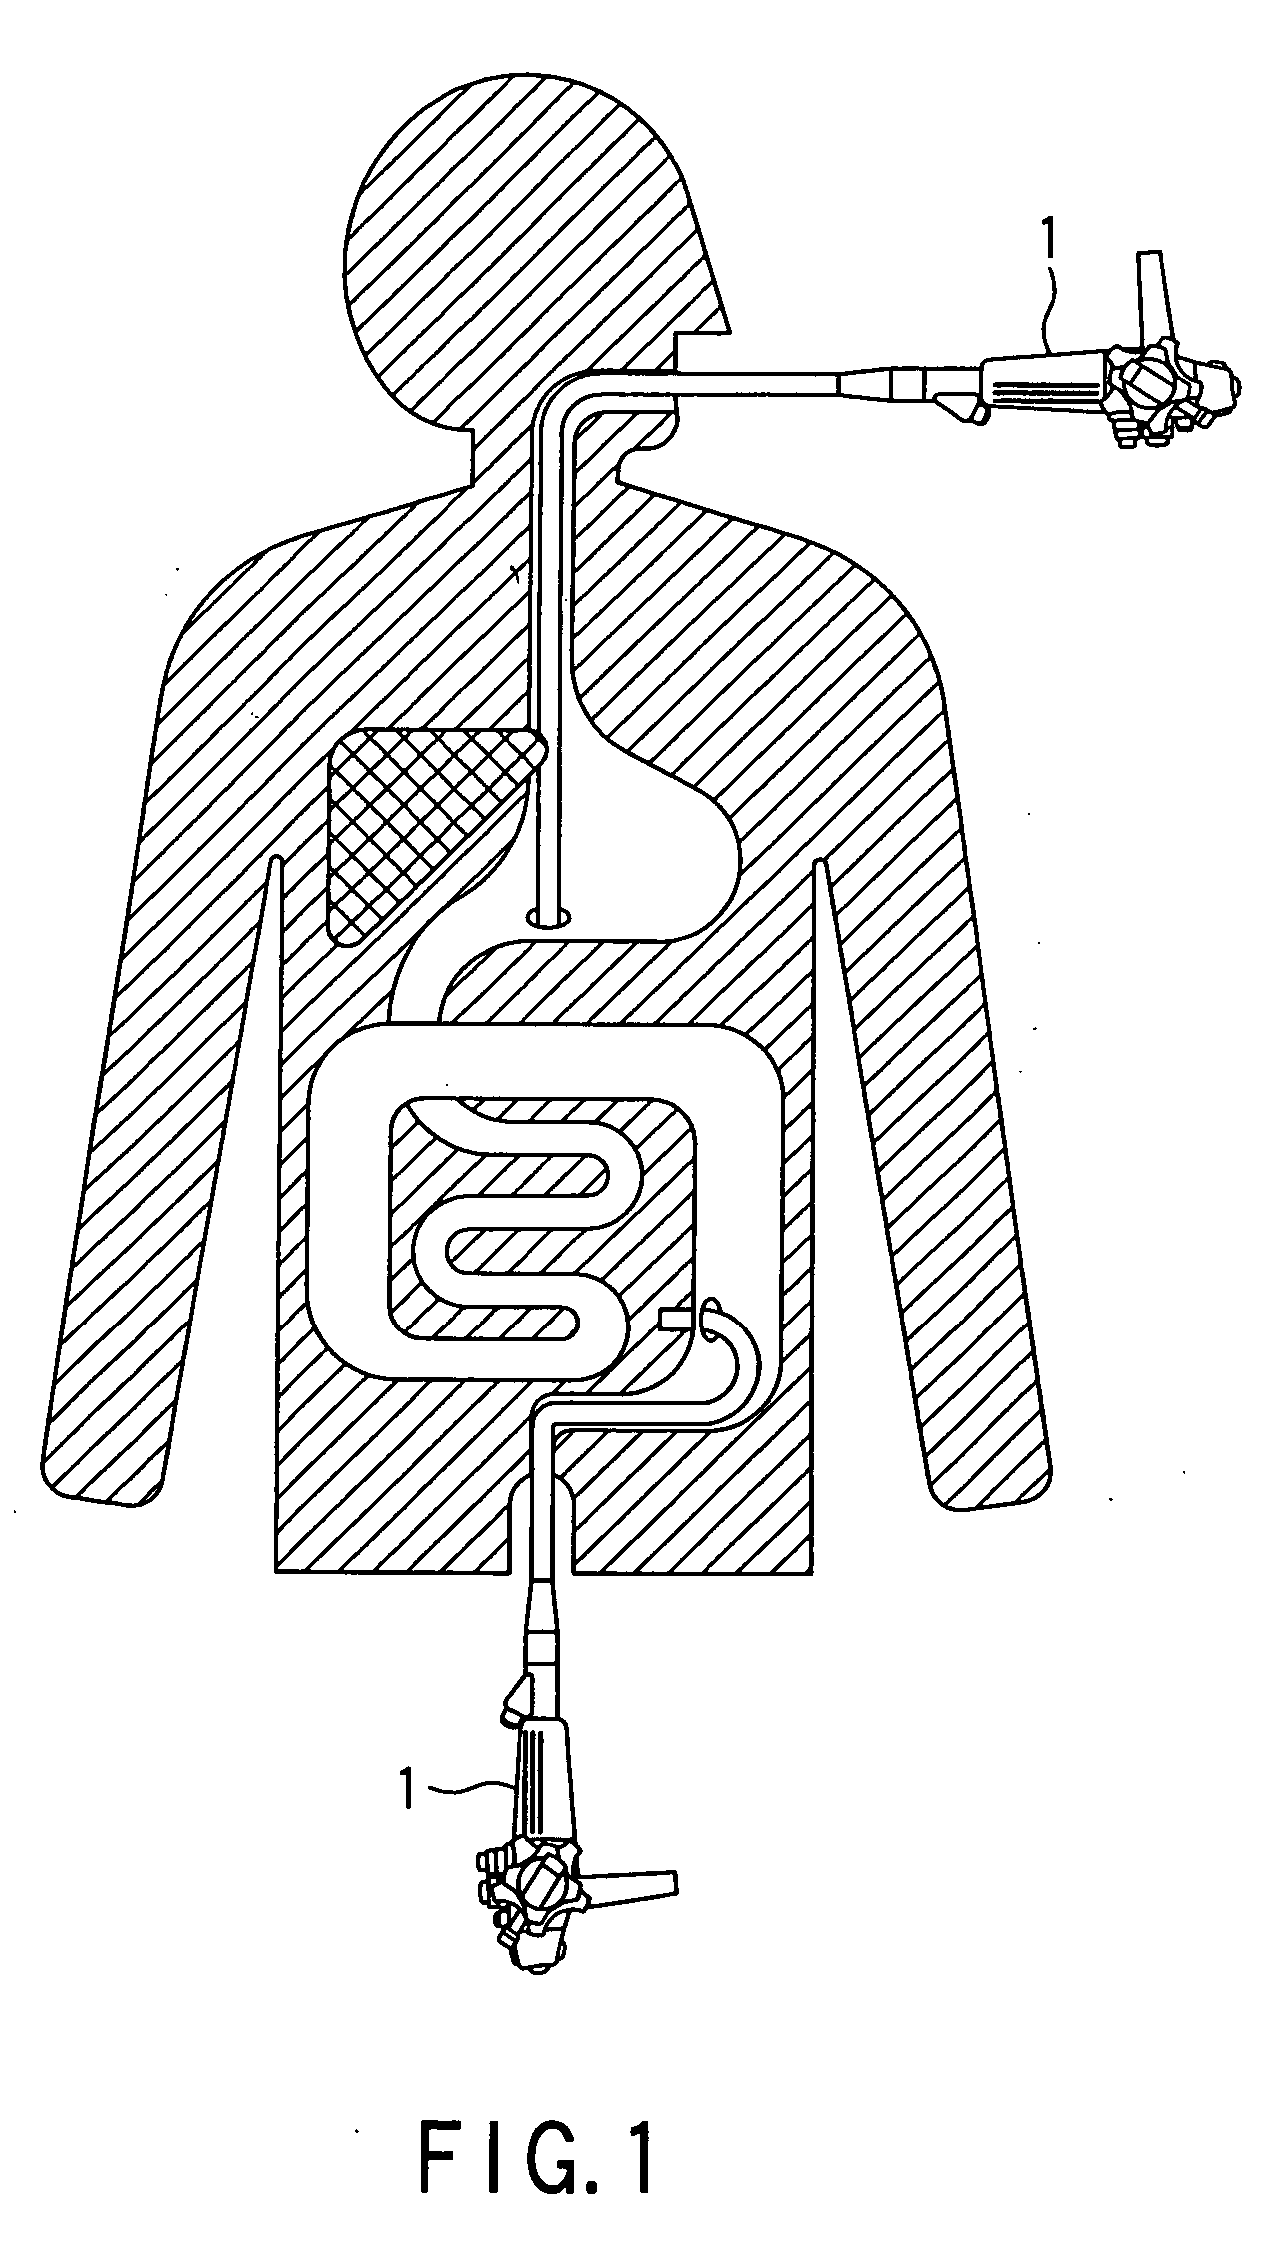 Endoscopic system for treating inside of body cavity